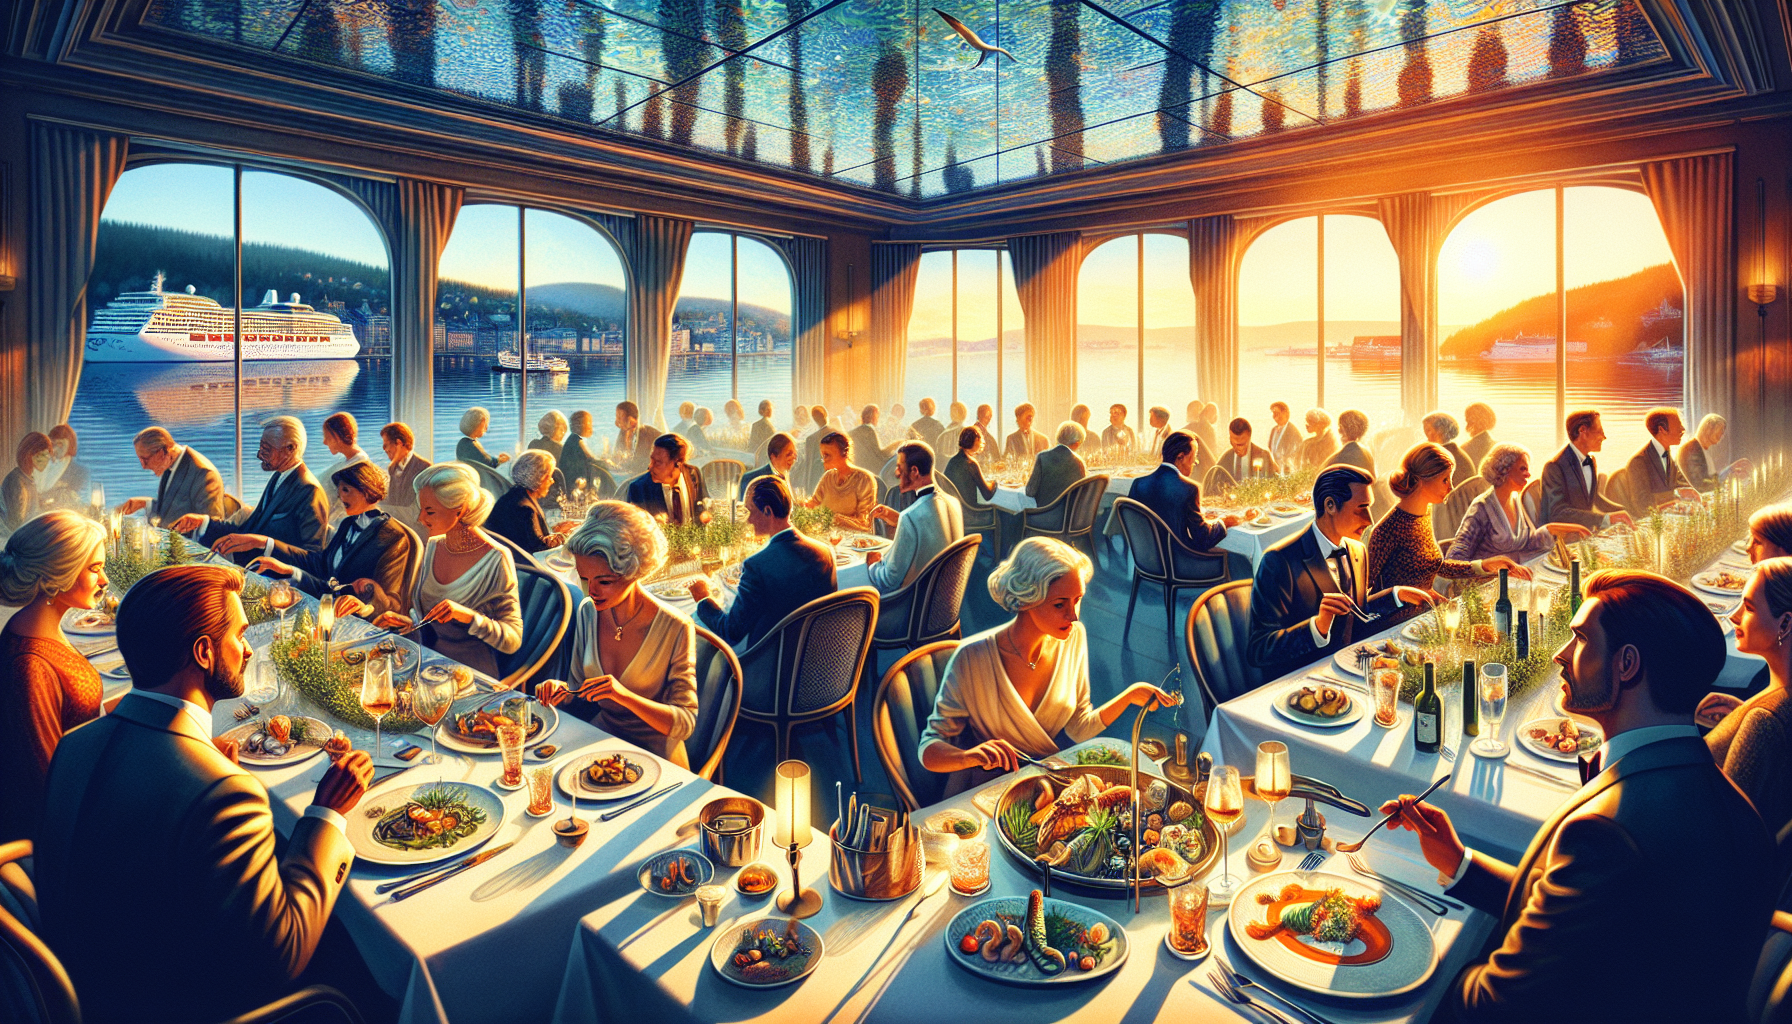 Illustration of exquisite dining experience in Oslo with waterfront view